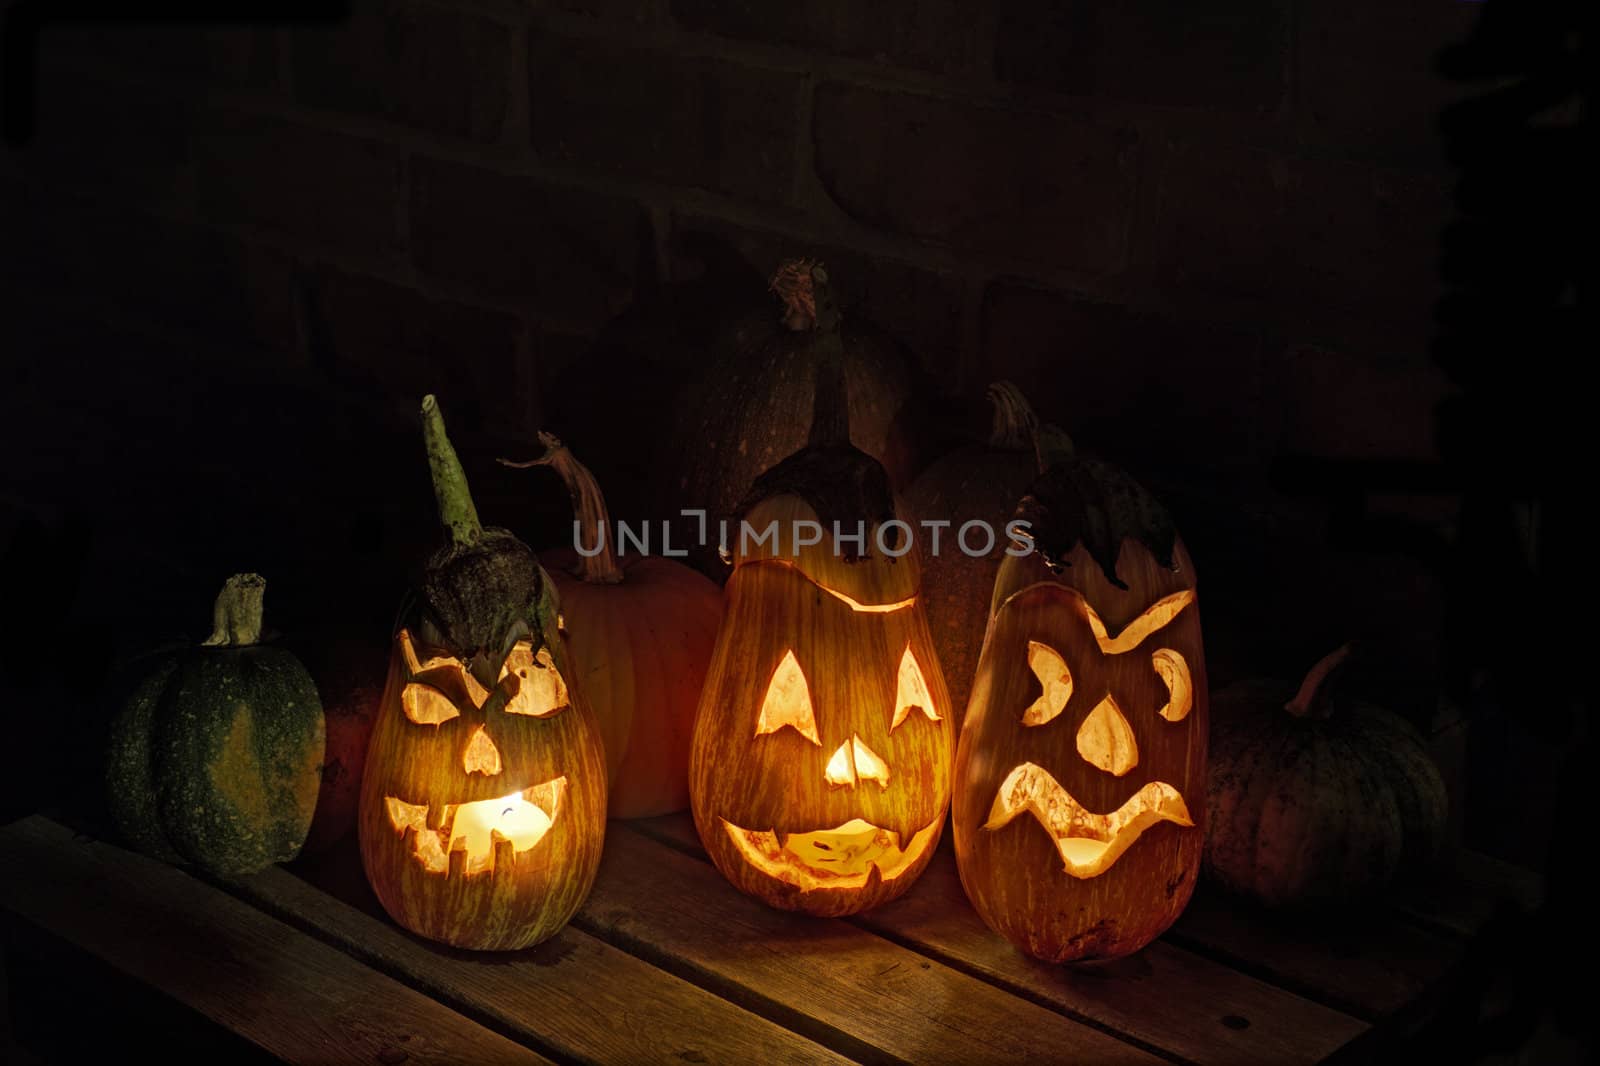 HDR image of carved eggplant jack o'lanterns with pumpkins and other squashes on a small table in teh dark form part of a display for the halloween holiday